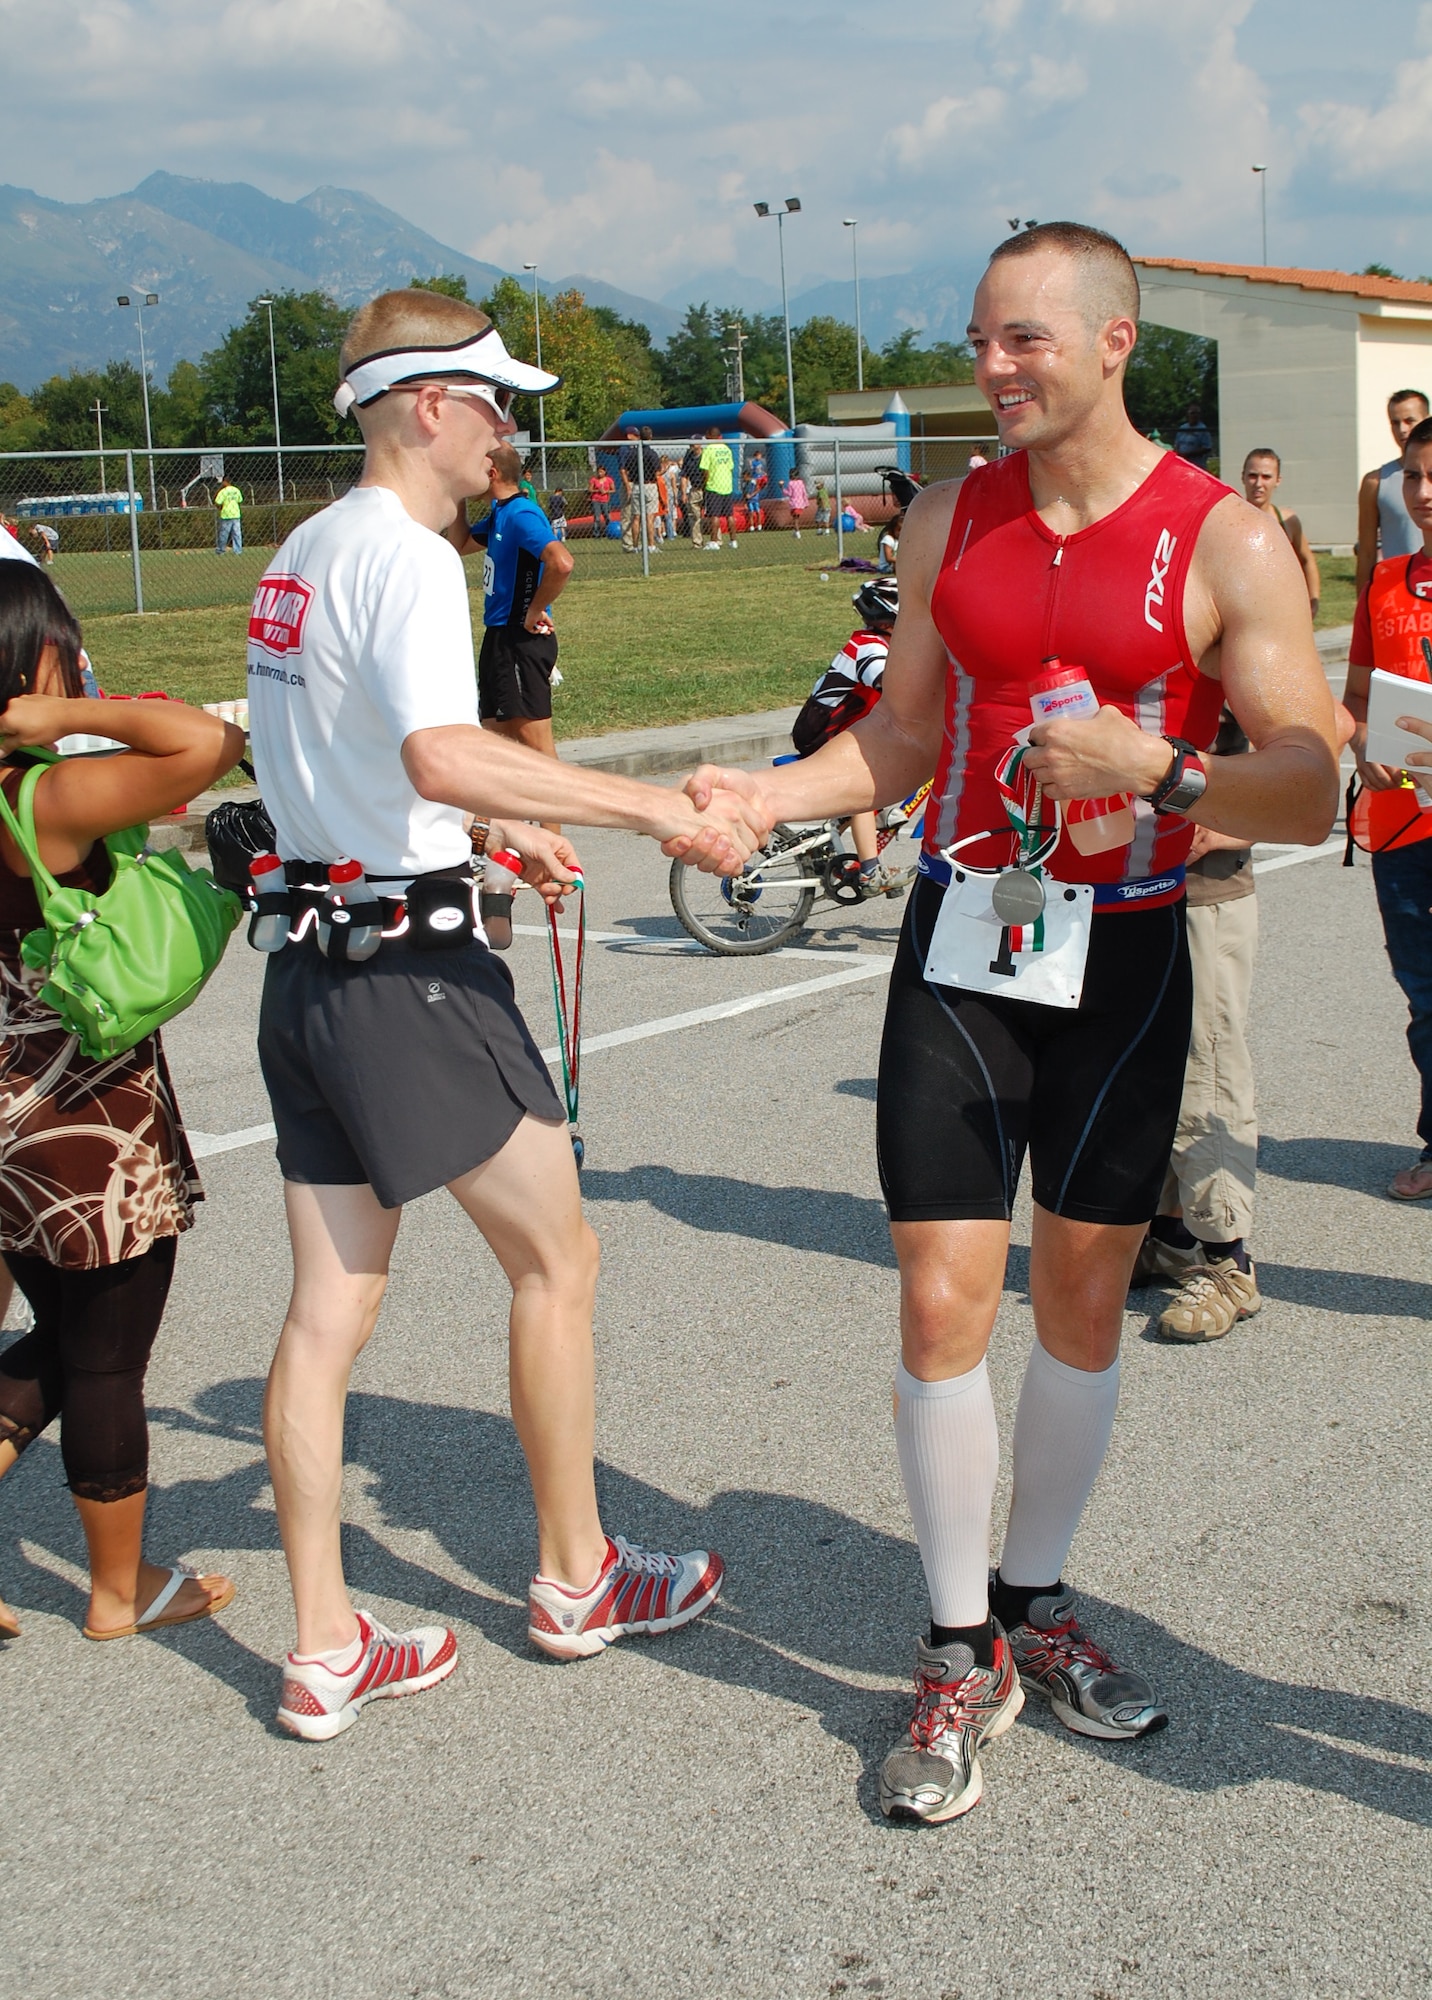 A fellow marathon runner congratulates Tech. Sgt. Brian Morris (right) on his first place finish in the Third Annual Aviano Marathon Sept. 13, 2009, held off base in and around the city of Aviano, Italy.  Sergeant Morris, 32, who previously took first place in the 2008 event held here, is stationed at Royal Air Force Mildenhall, England, and completed this year's 42-kilometer course in 3:11:03. (U.S. Air Force photo/Tech. Sgt. Michael O'Connor)